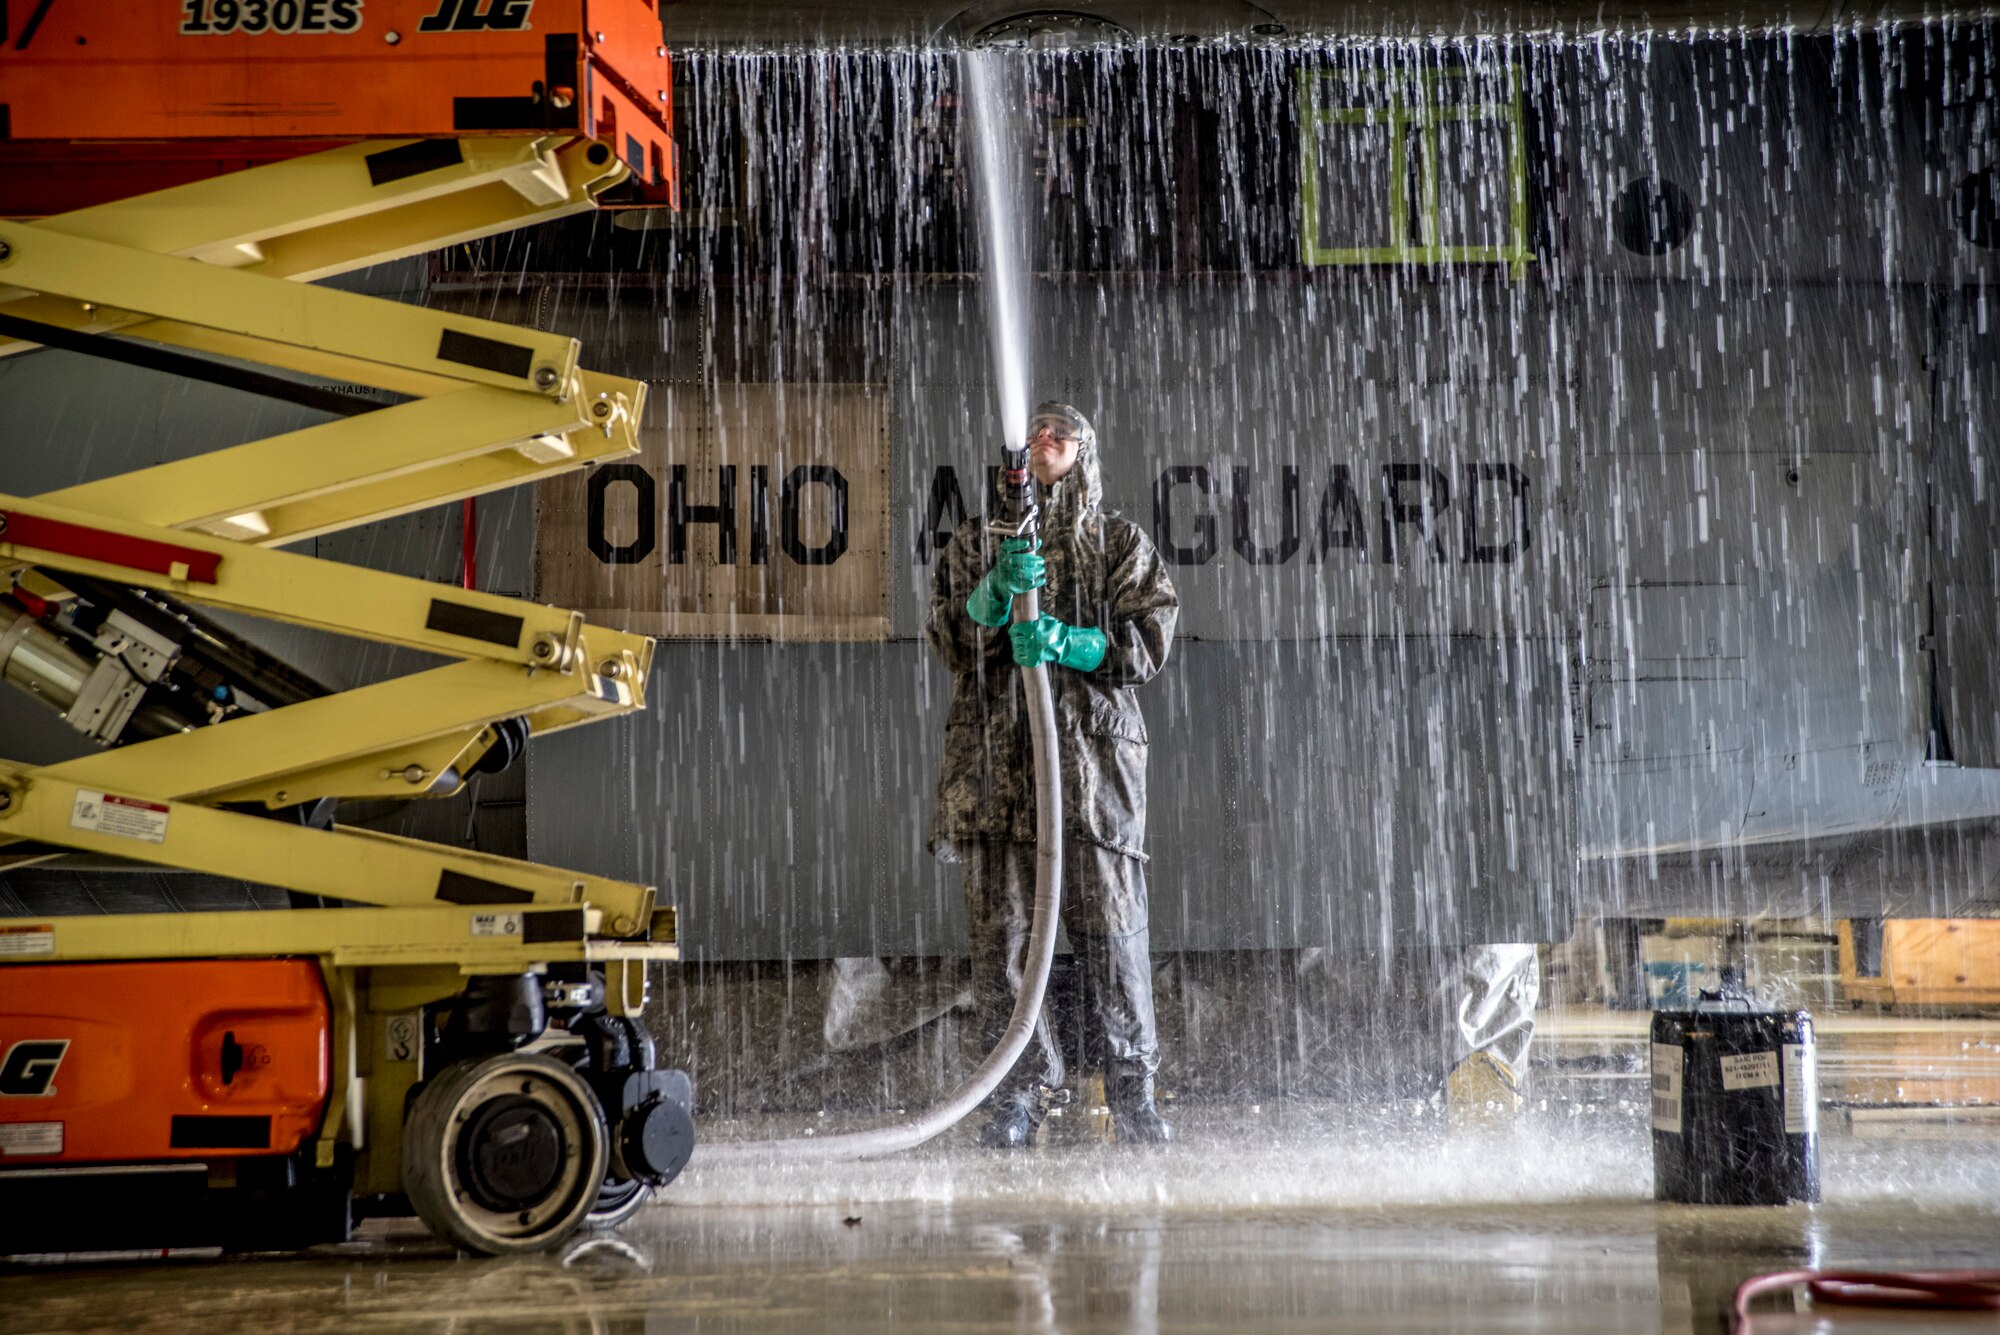 A photo of a military member using a hose to spray water onto a C-130 in the aircraft hanger.